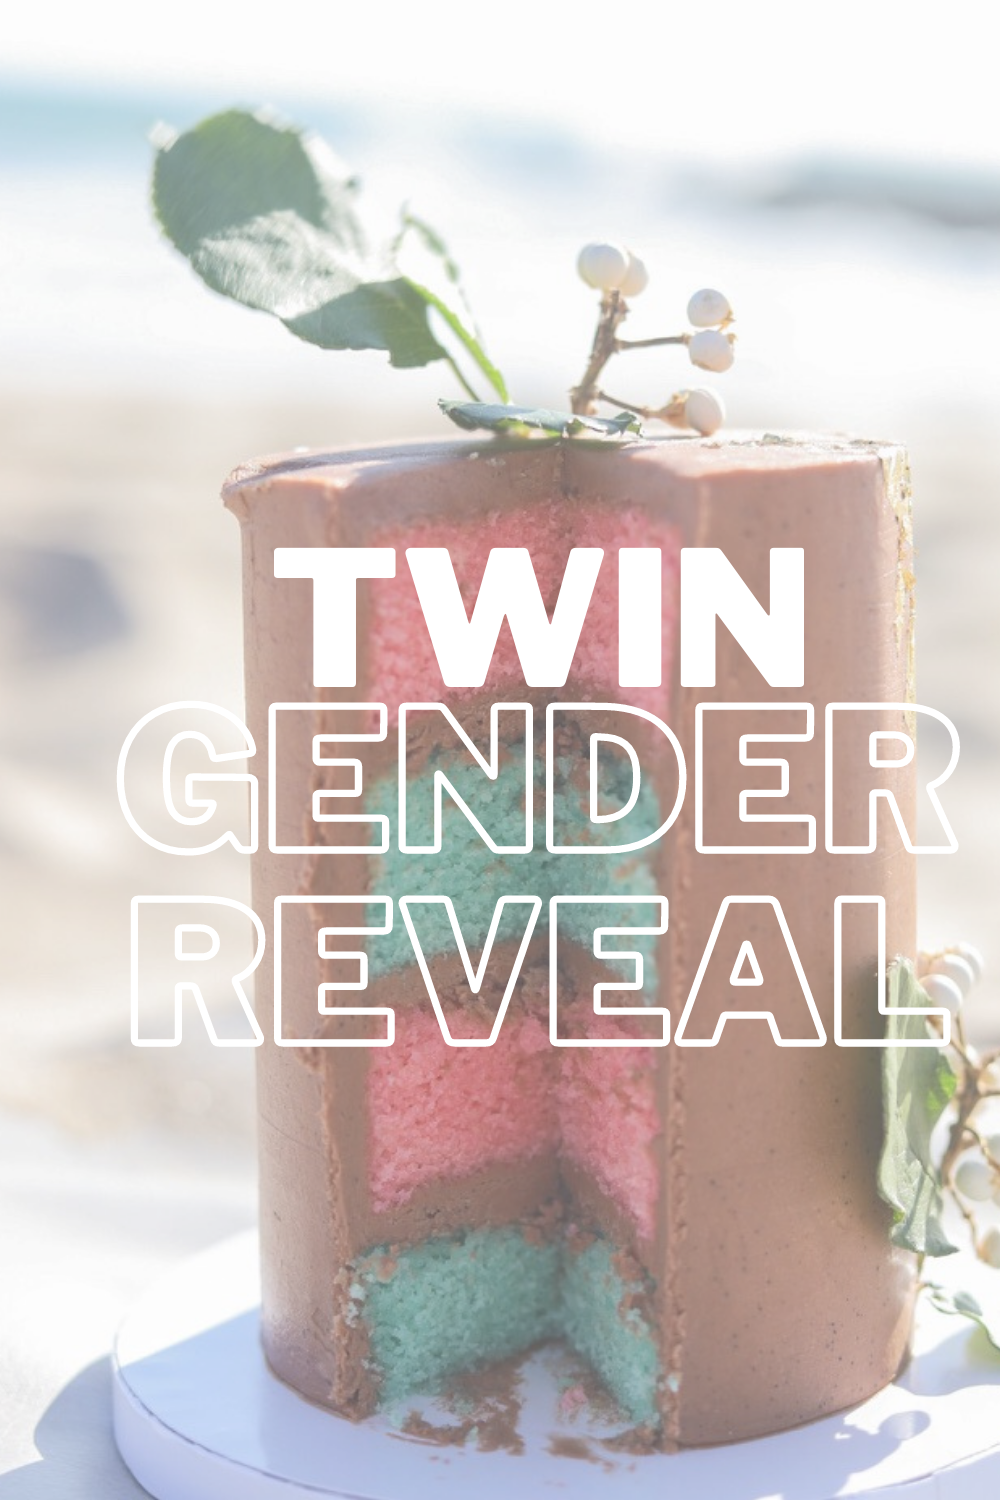 twin gender reveal, sweet dreams bakery oc, di-di twins, boy girl twins, lments of style, la blogger, sex of the baby announcement, gender reveal ideas, intimate gender reveal